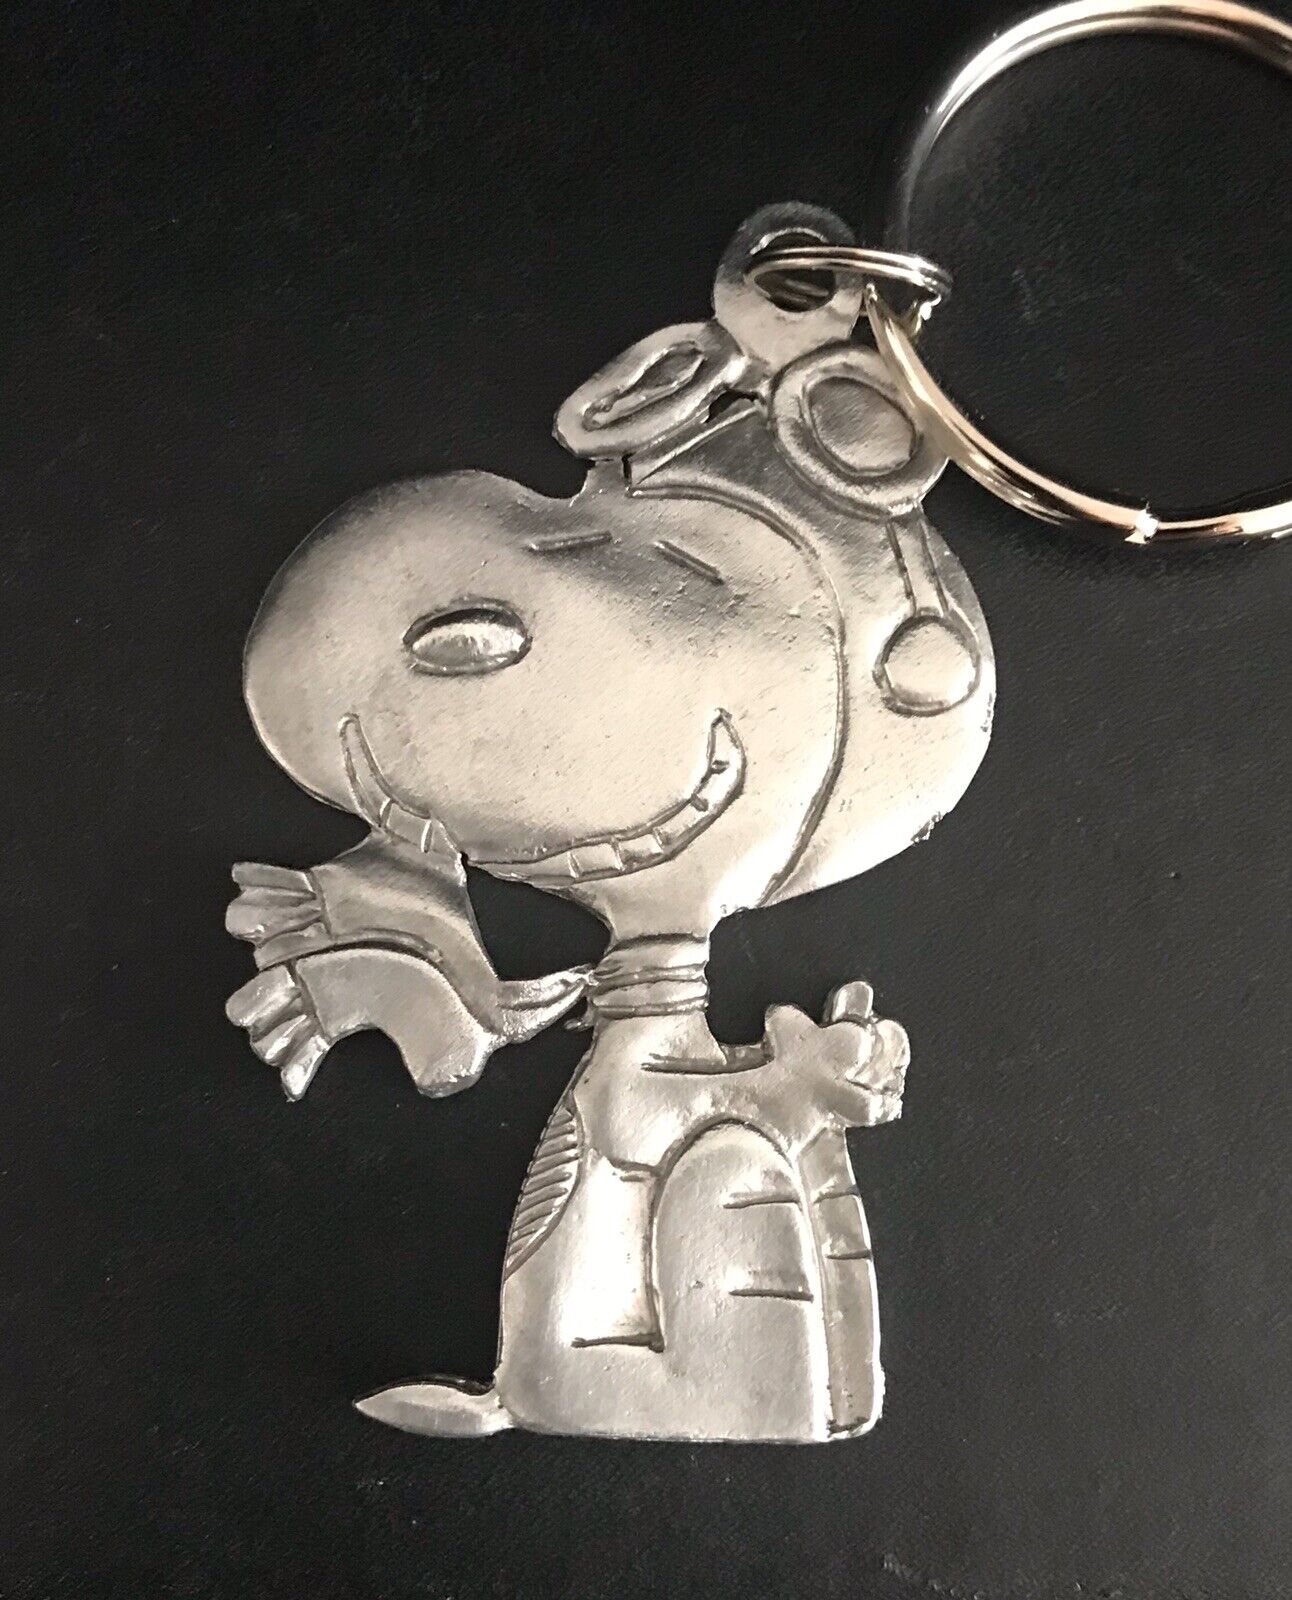 Pewter Silver SNOOPY Pilot Flying Charlie Brown Peanuts Figurine Keychain A